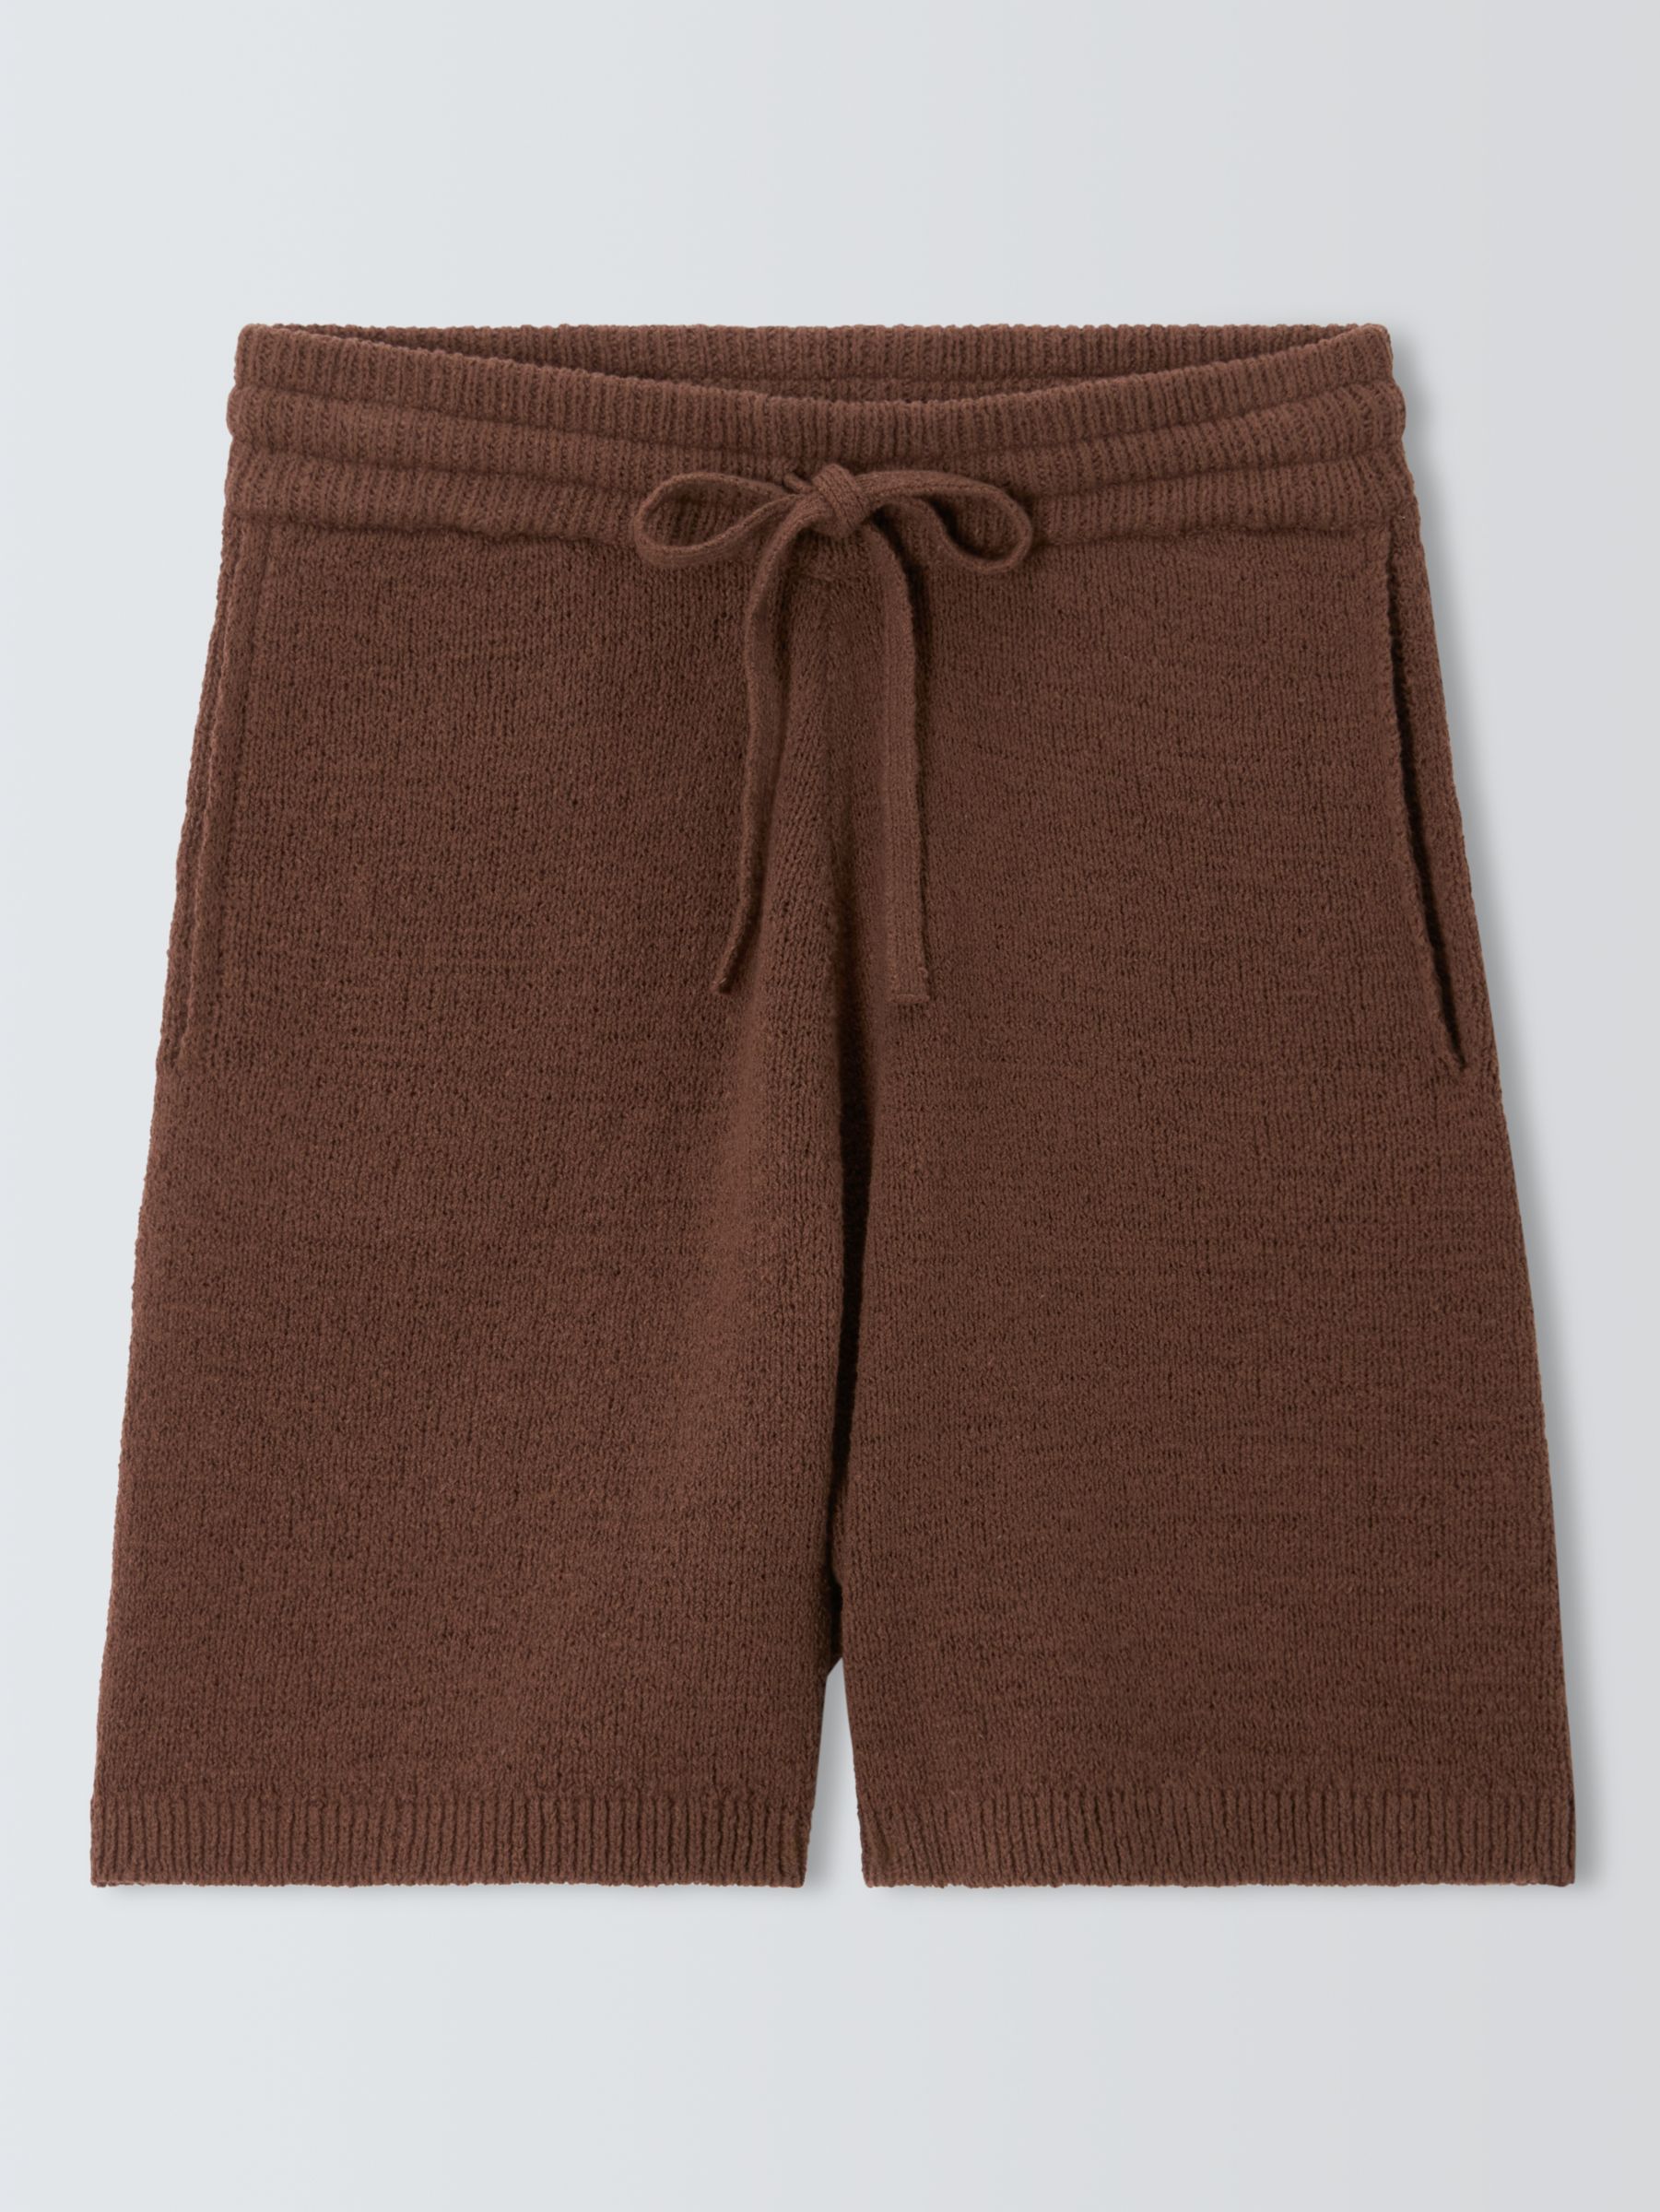 John Lewis ANYDAY Knitted Shorts, Brown, XS